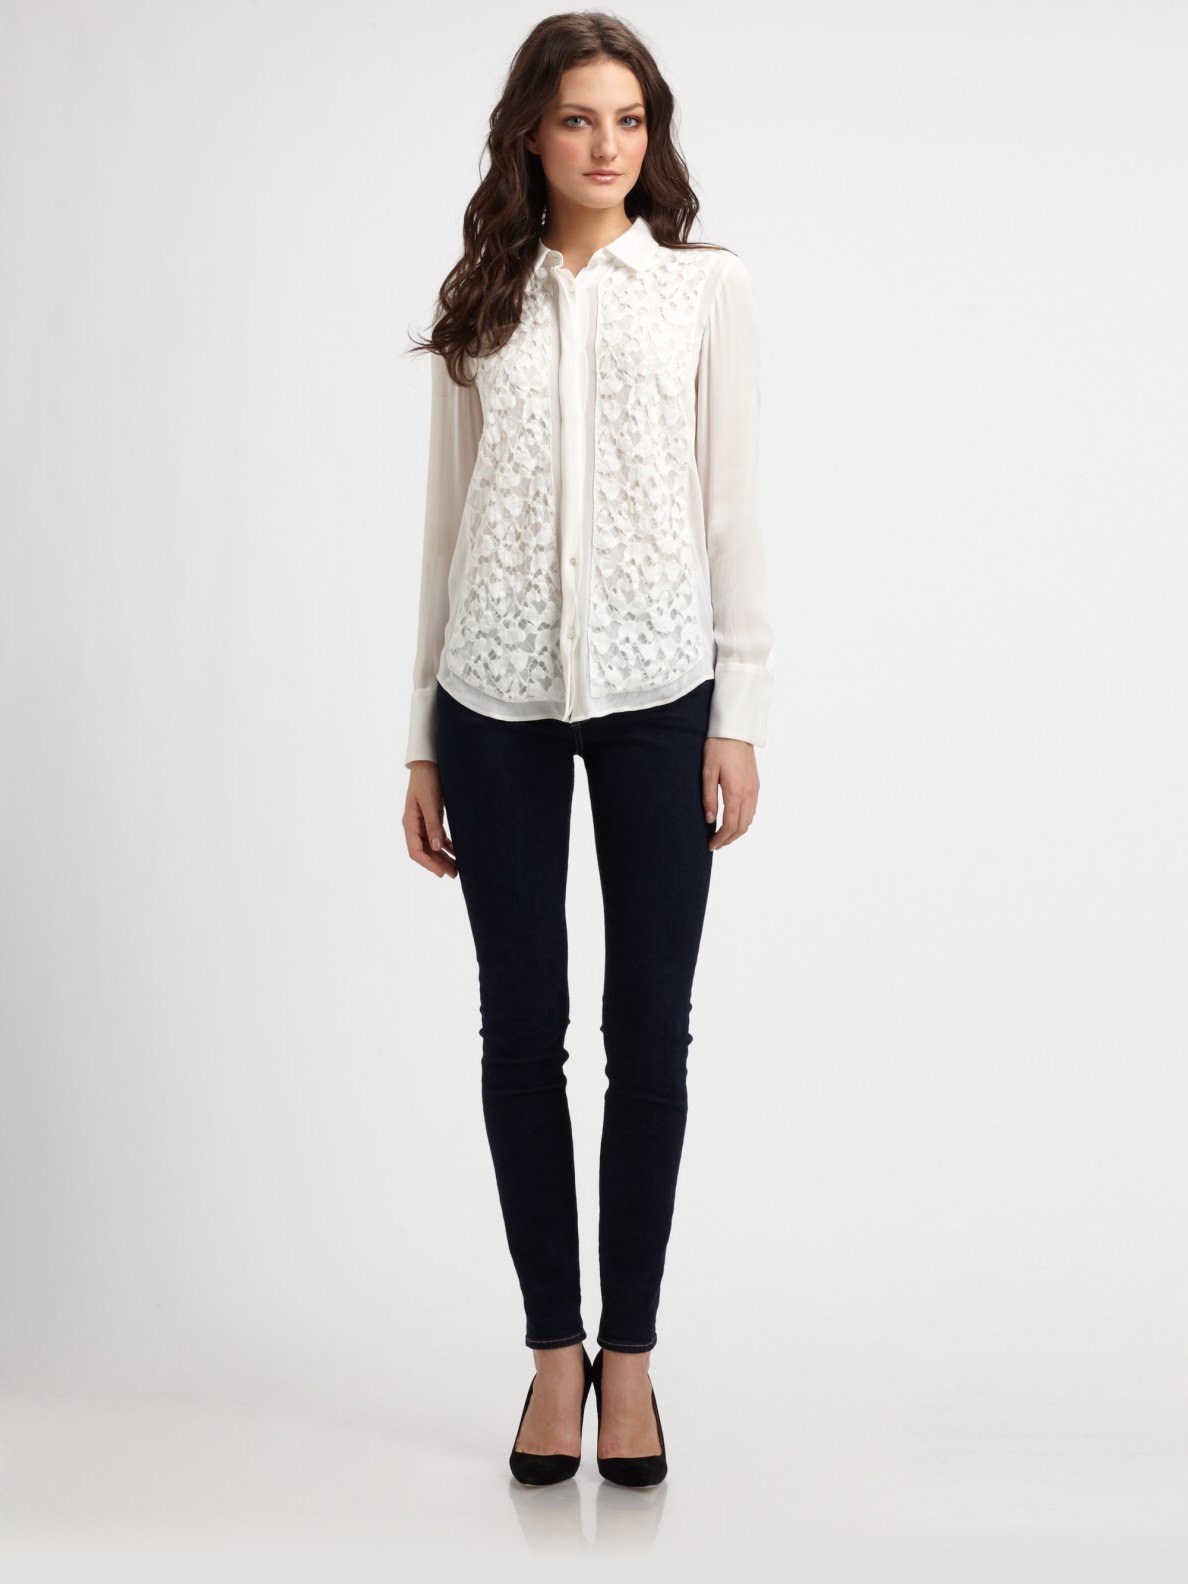 Brainy Mademoiselle: White Lace Top